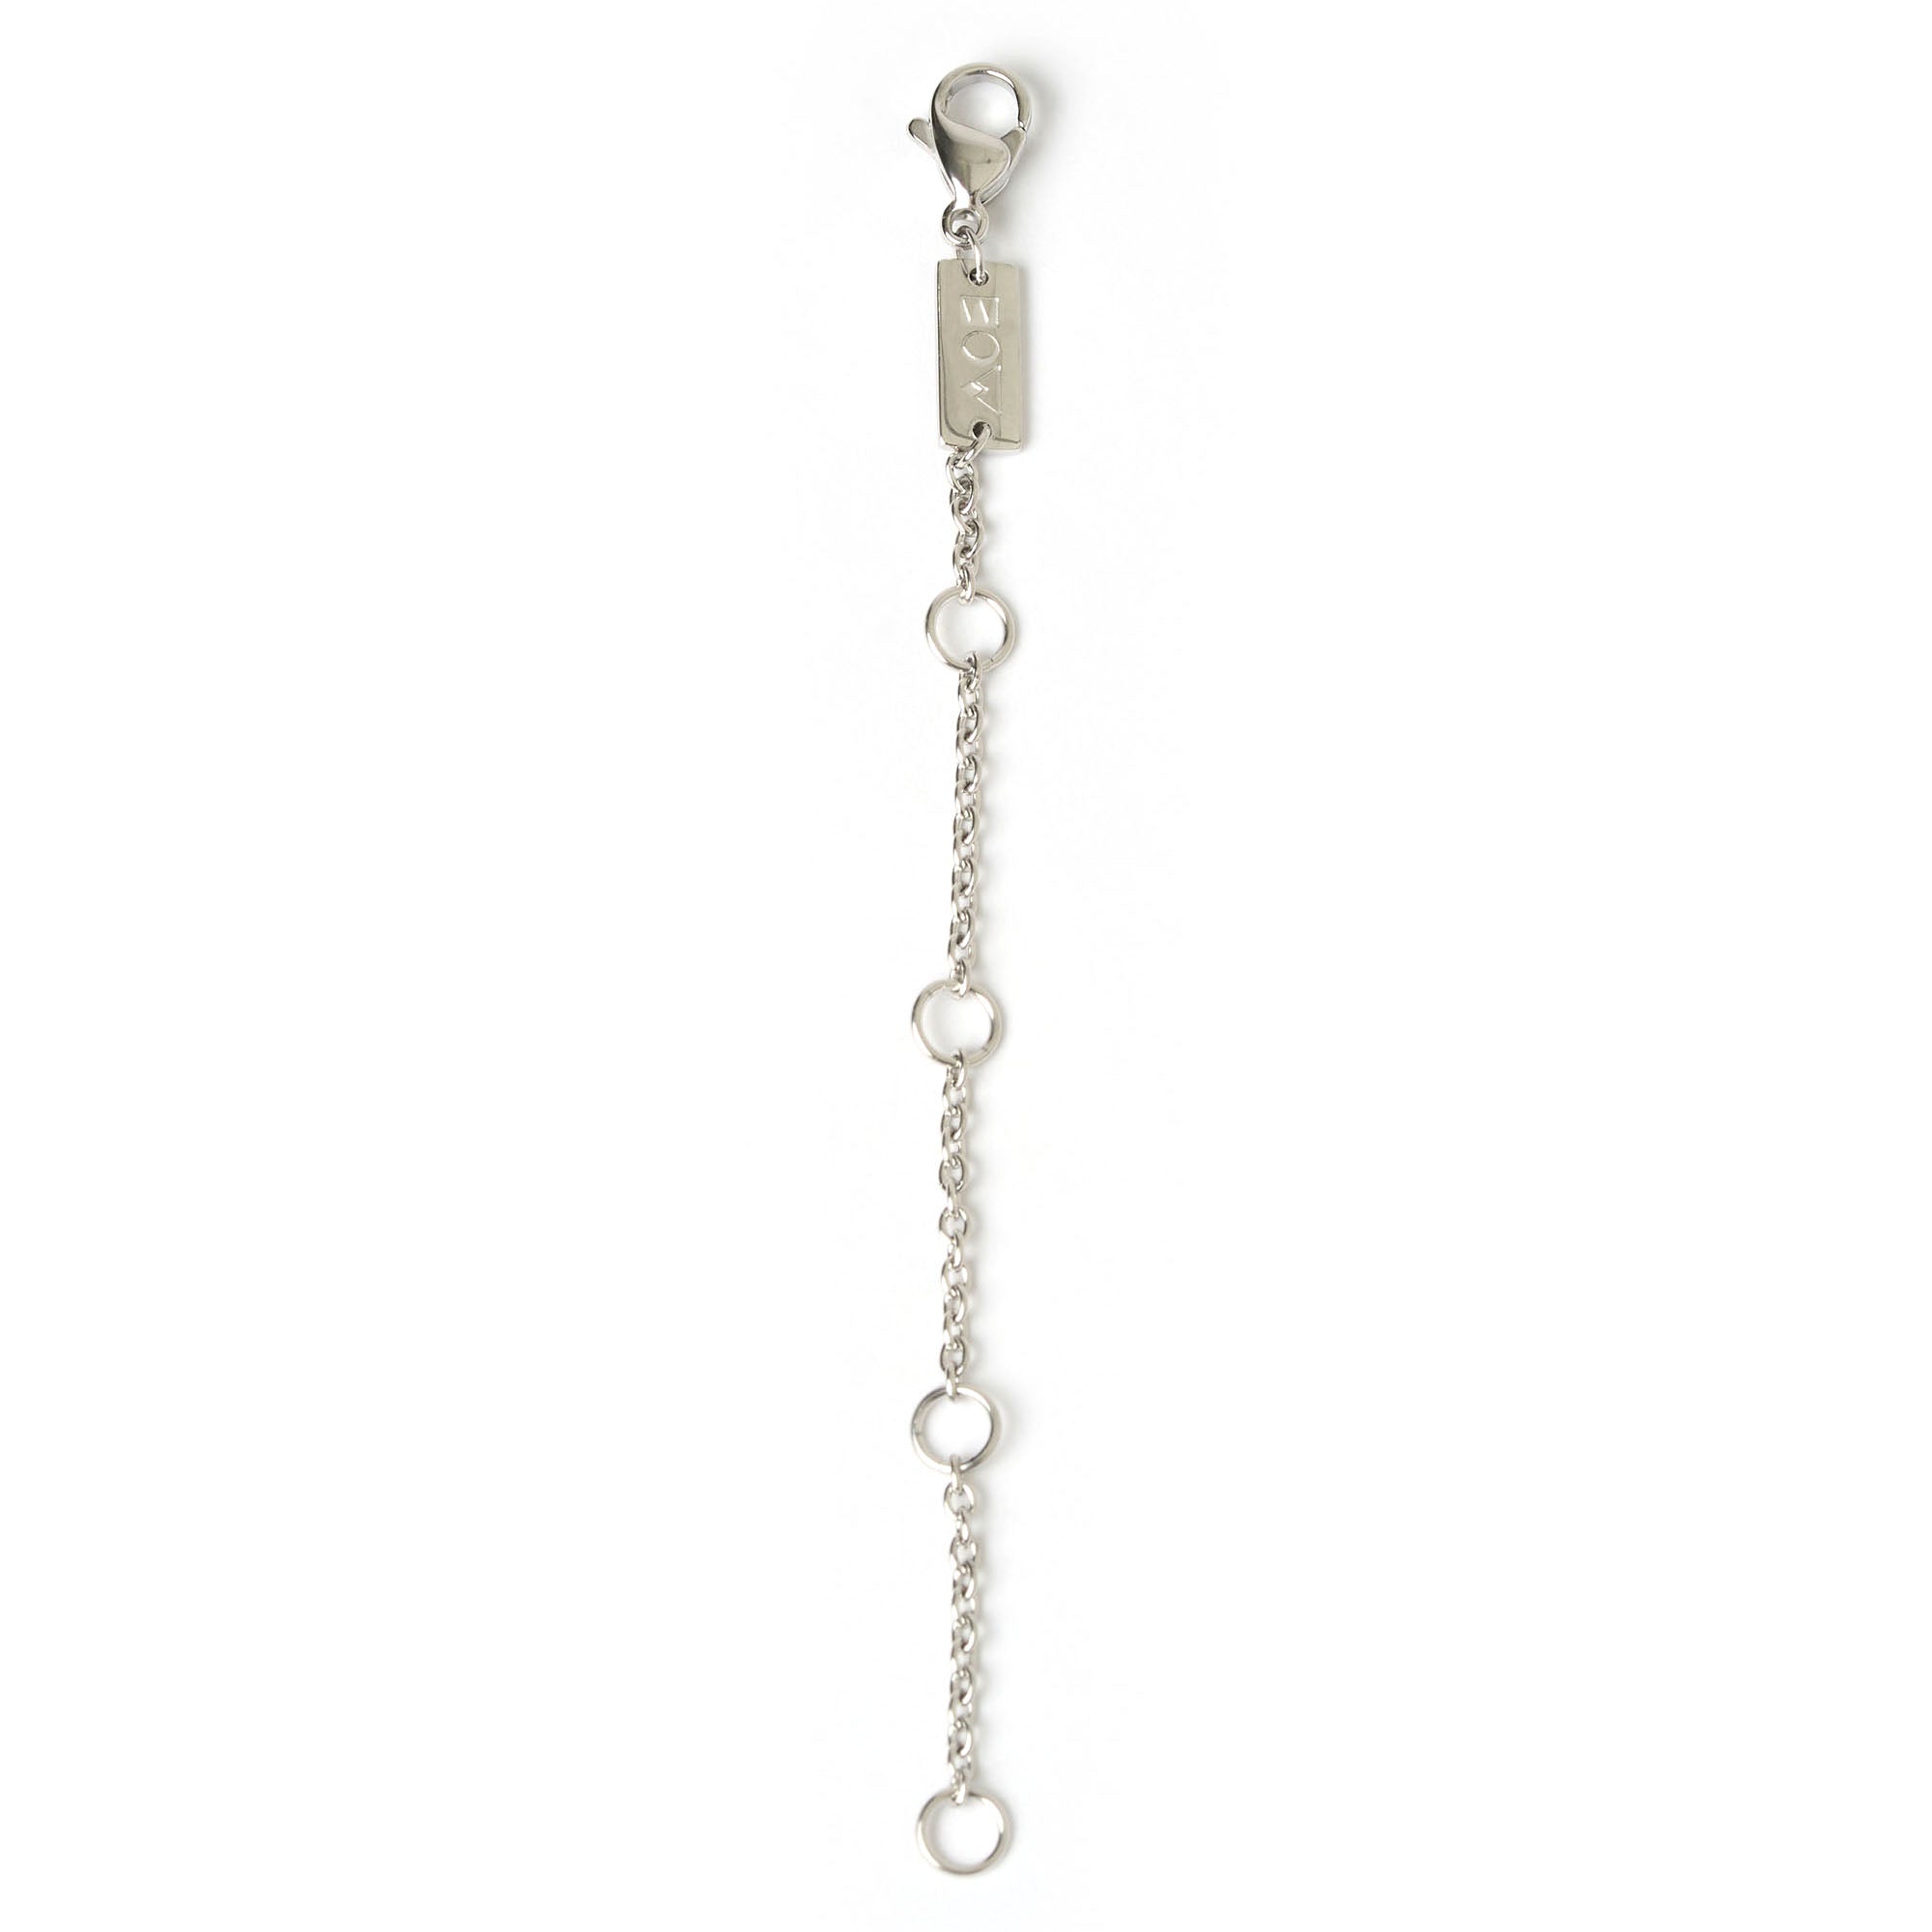 Necklace Chain Extension - Silver